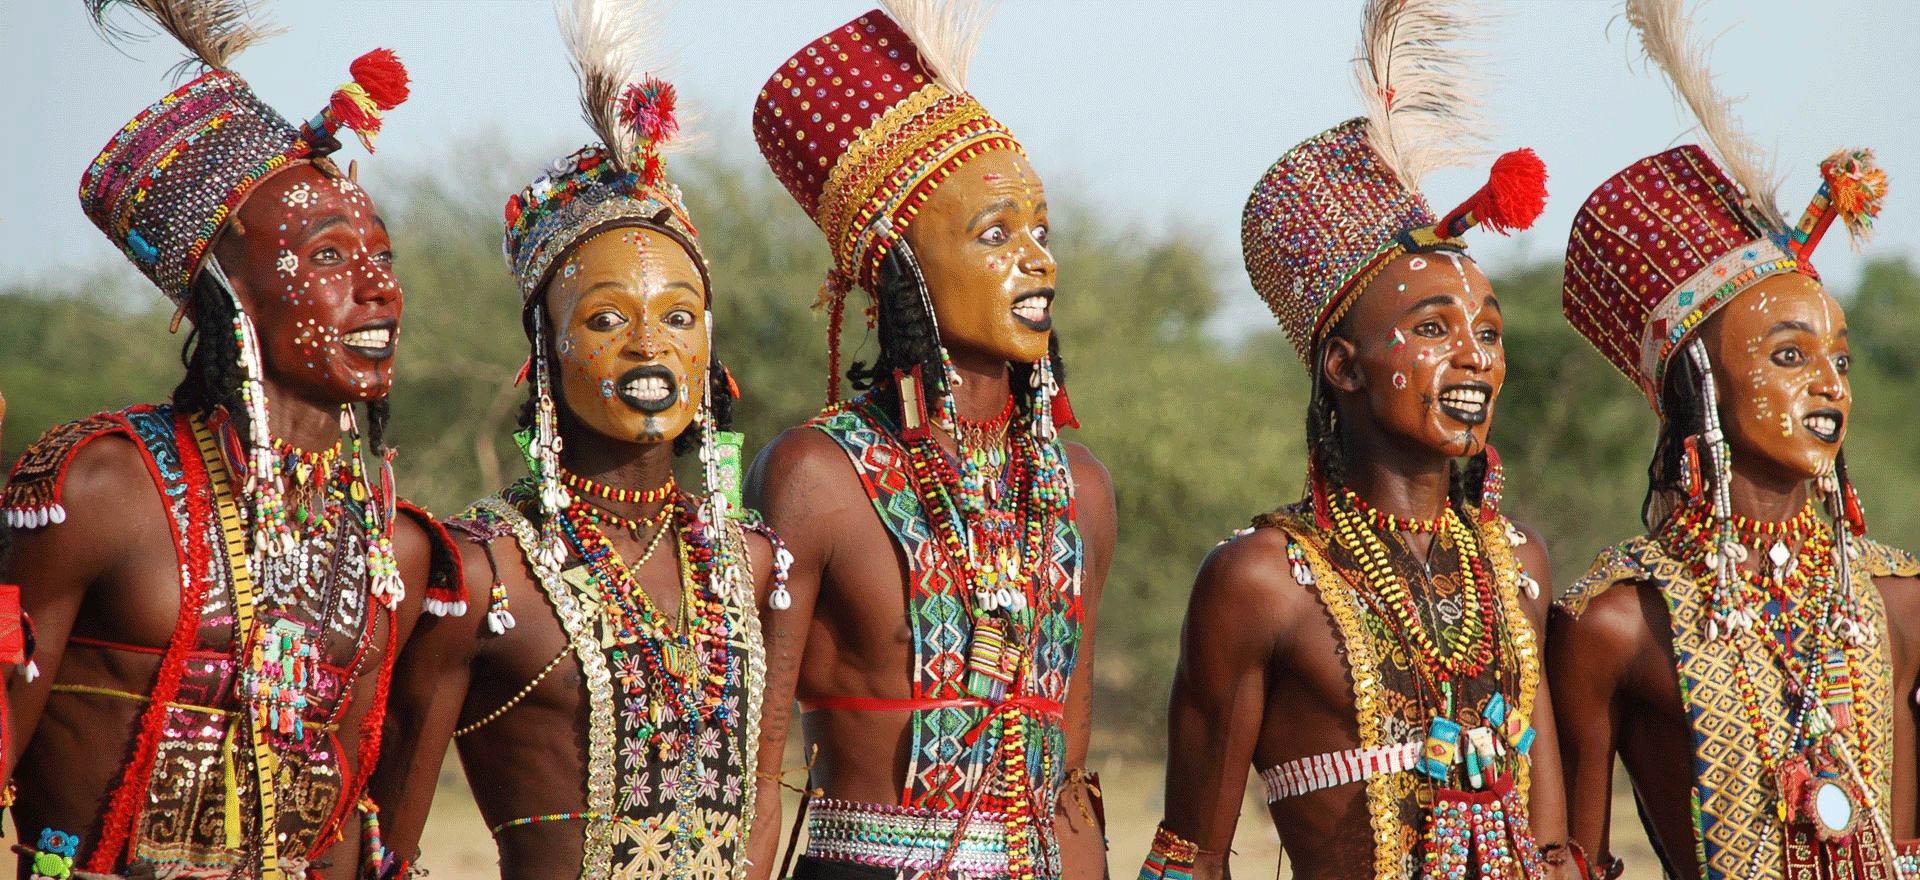 Wodaabe men at the Gerewol Festival - Chad tours